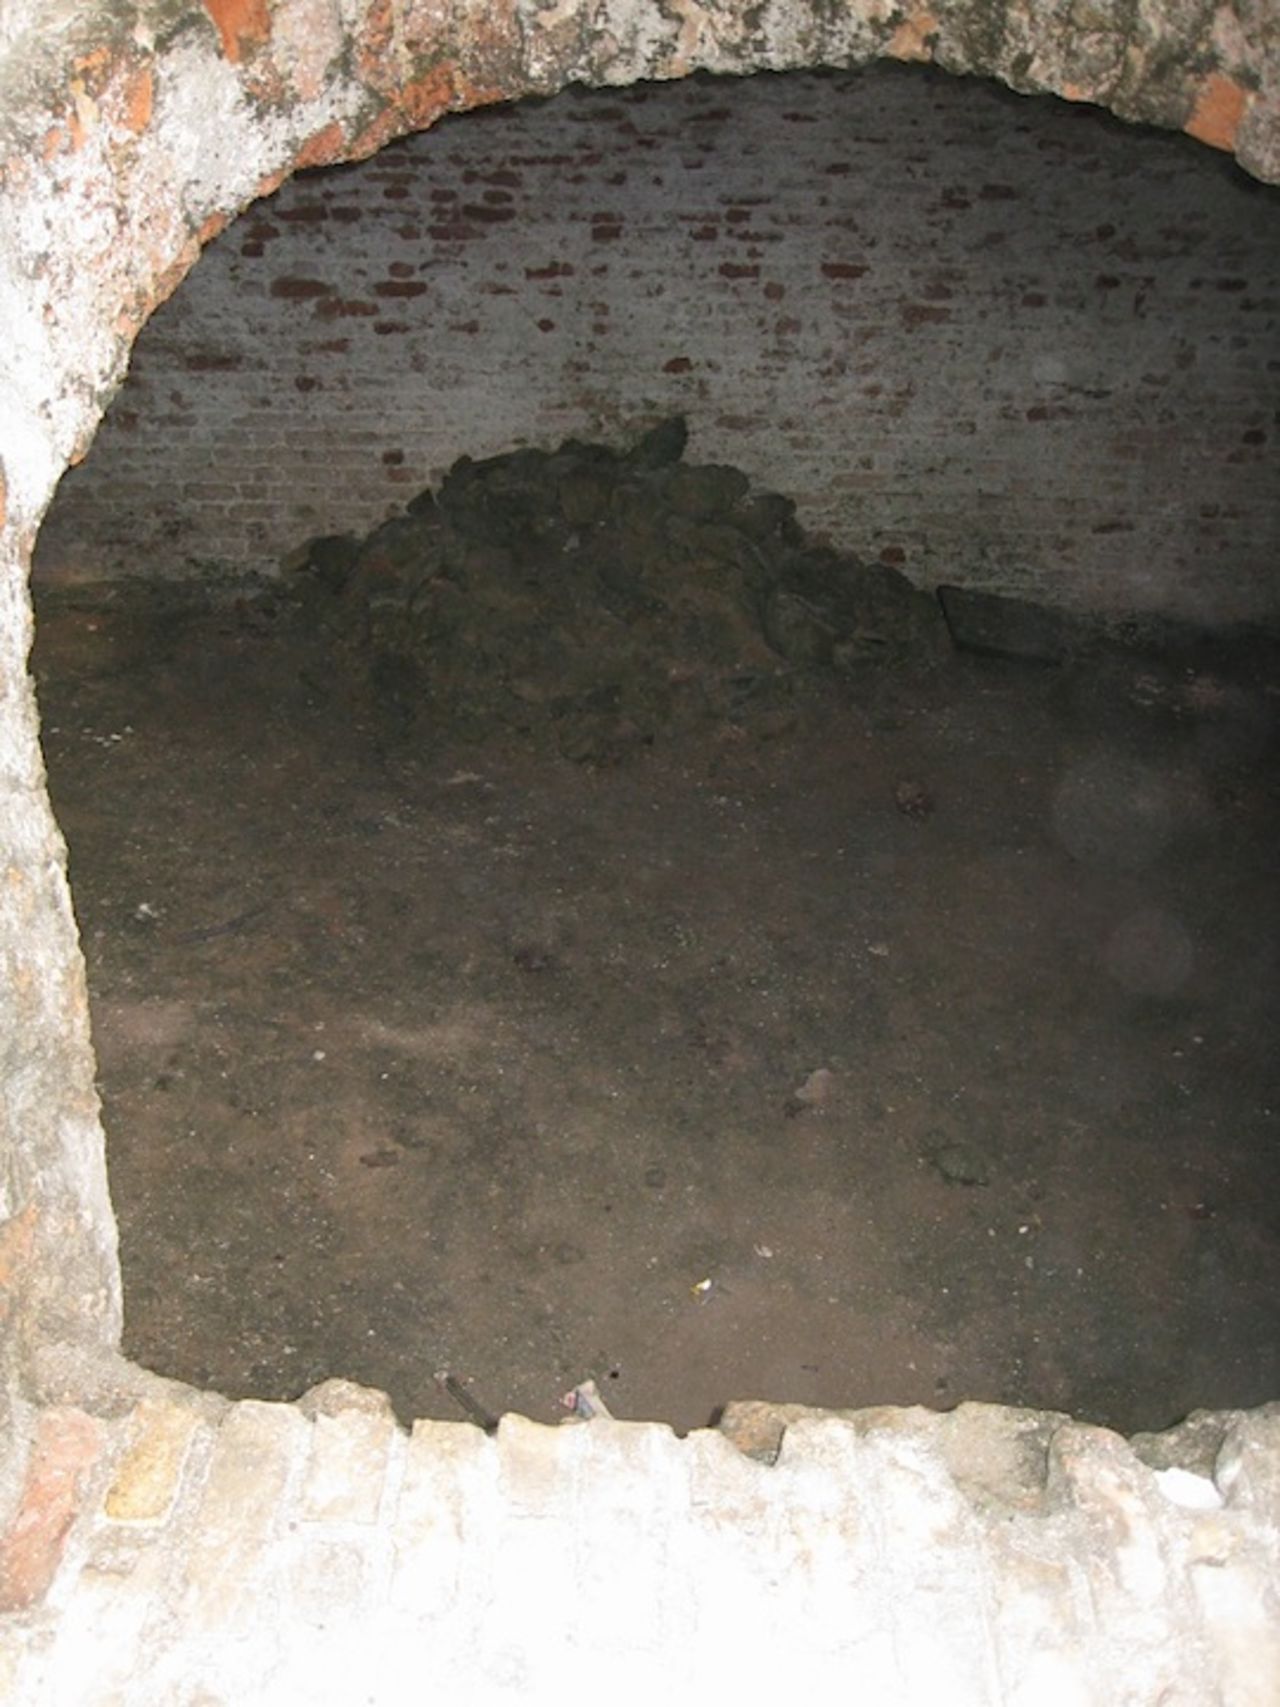 A view into the walking tunnel, where slaves were walked from the dungeons to the Door of No Return. They only surfaced briefly, to walk through the door and on to a waiting ship, where they were taken to the Americas. About 40% of the slaves died.